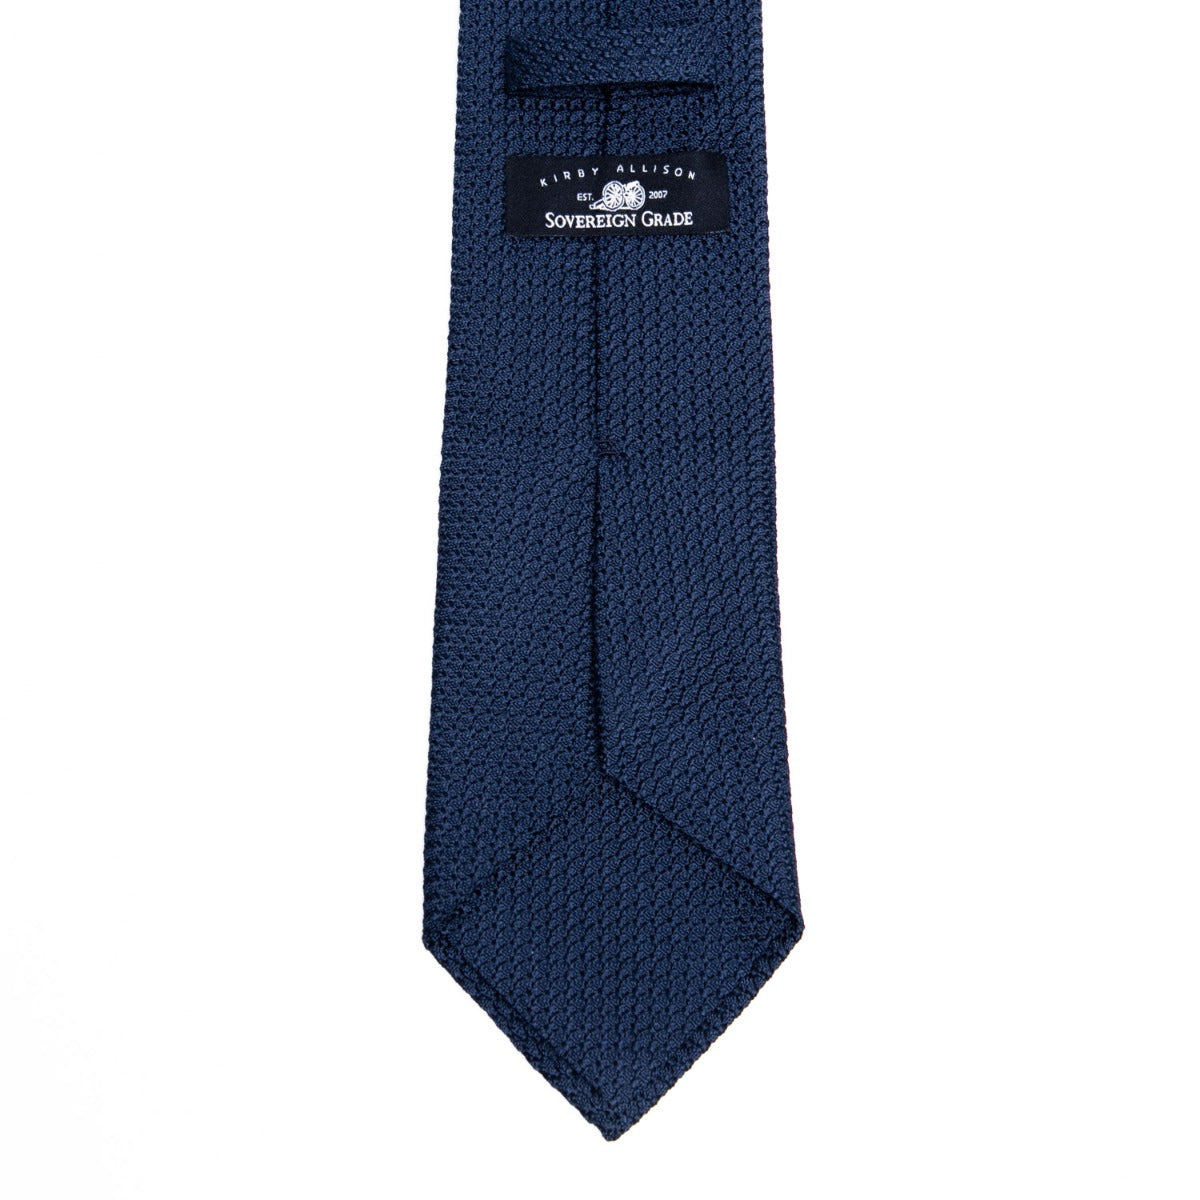 A Sovereign Grade Grenadine Grossa Dark Navy Tie by KirbyAllison.com, of the highest quality, featuring a small logo.